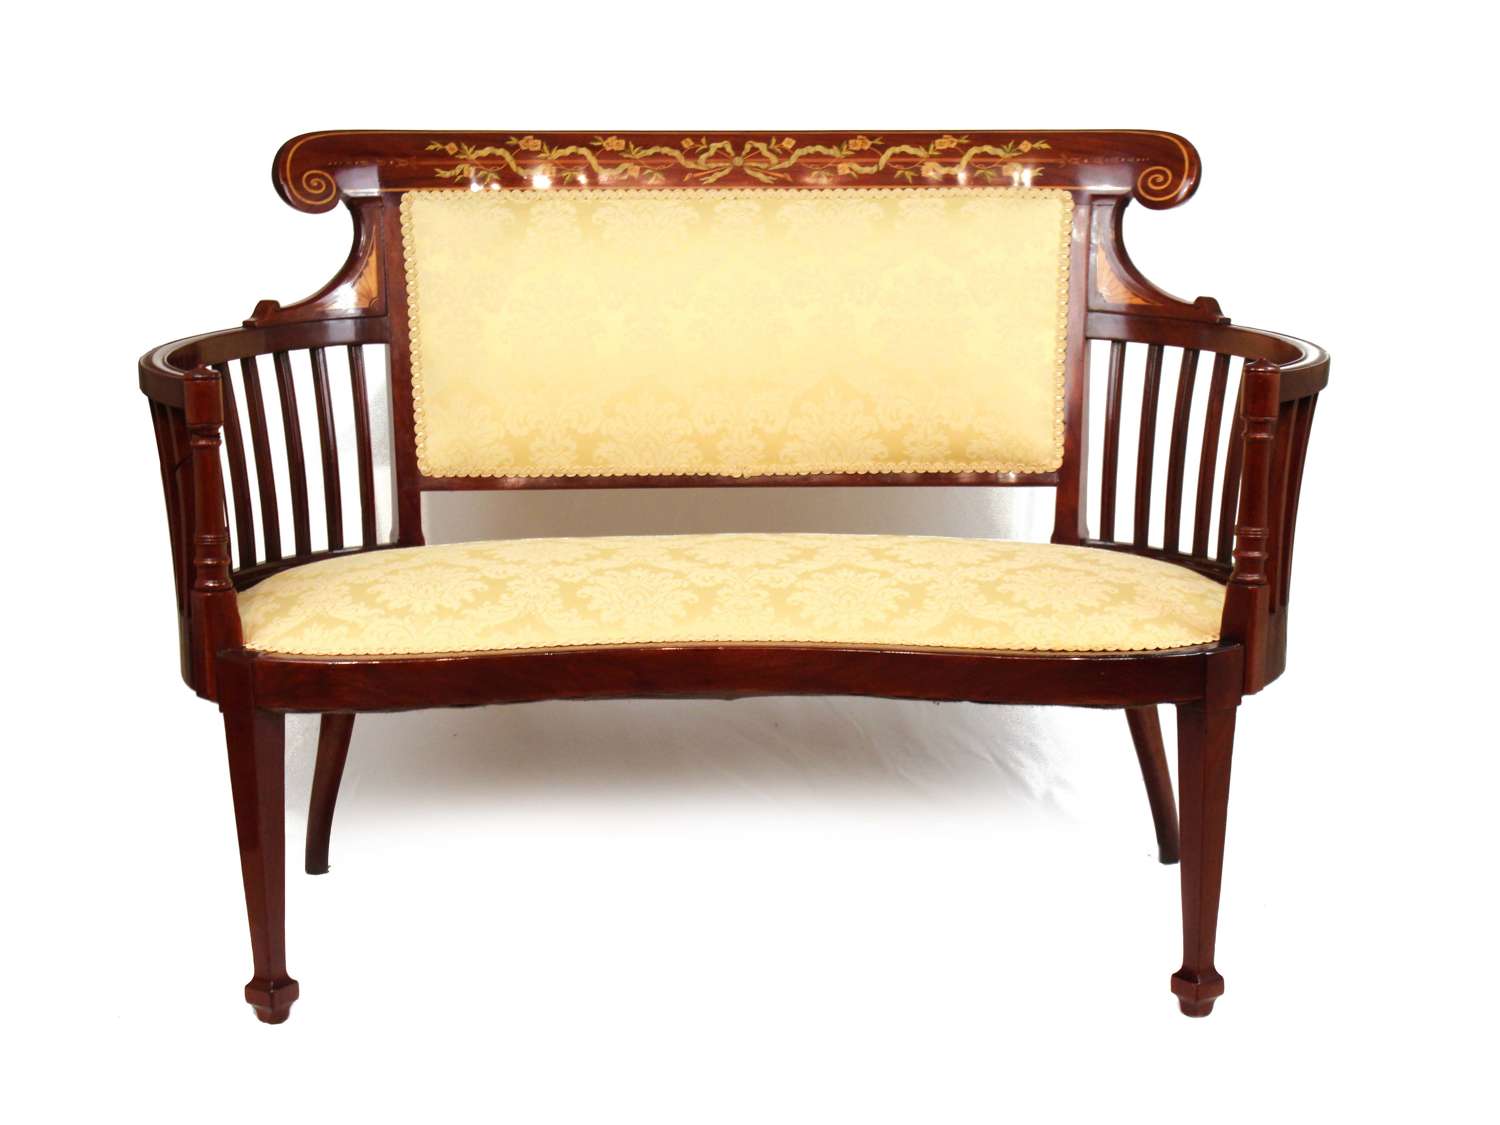 A Fine Quality Late Victorian Mahogany Inlaid Settee